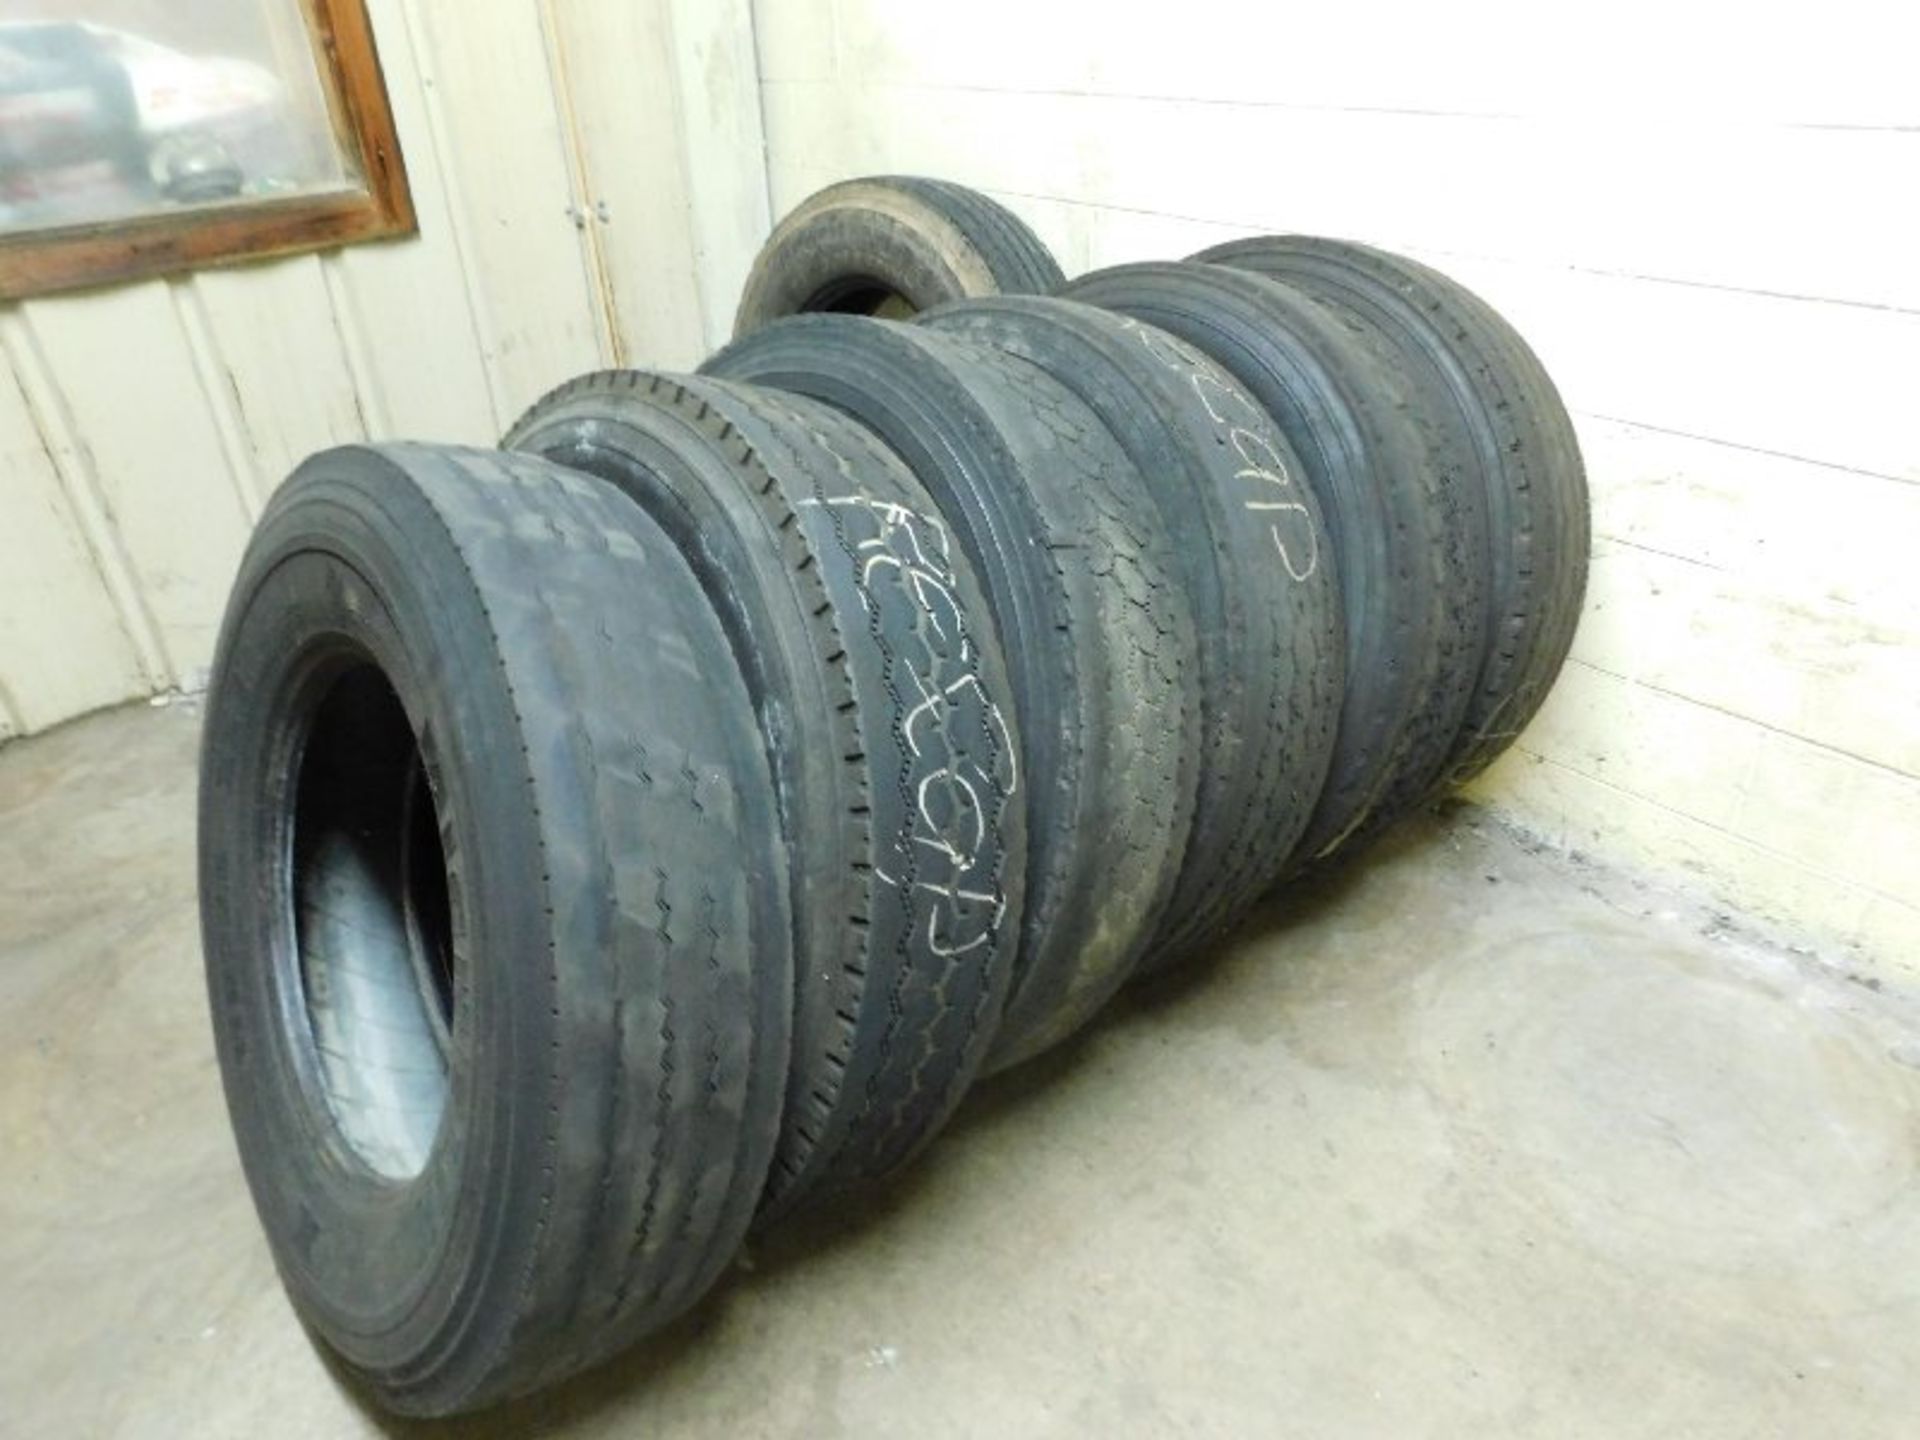 All Truck Tires in Room Used and Retread, Assorted Size and Types, (2) 9R22.5 Retreads, (1) 10.00R20 - Image 2 of 5